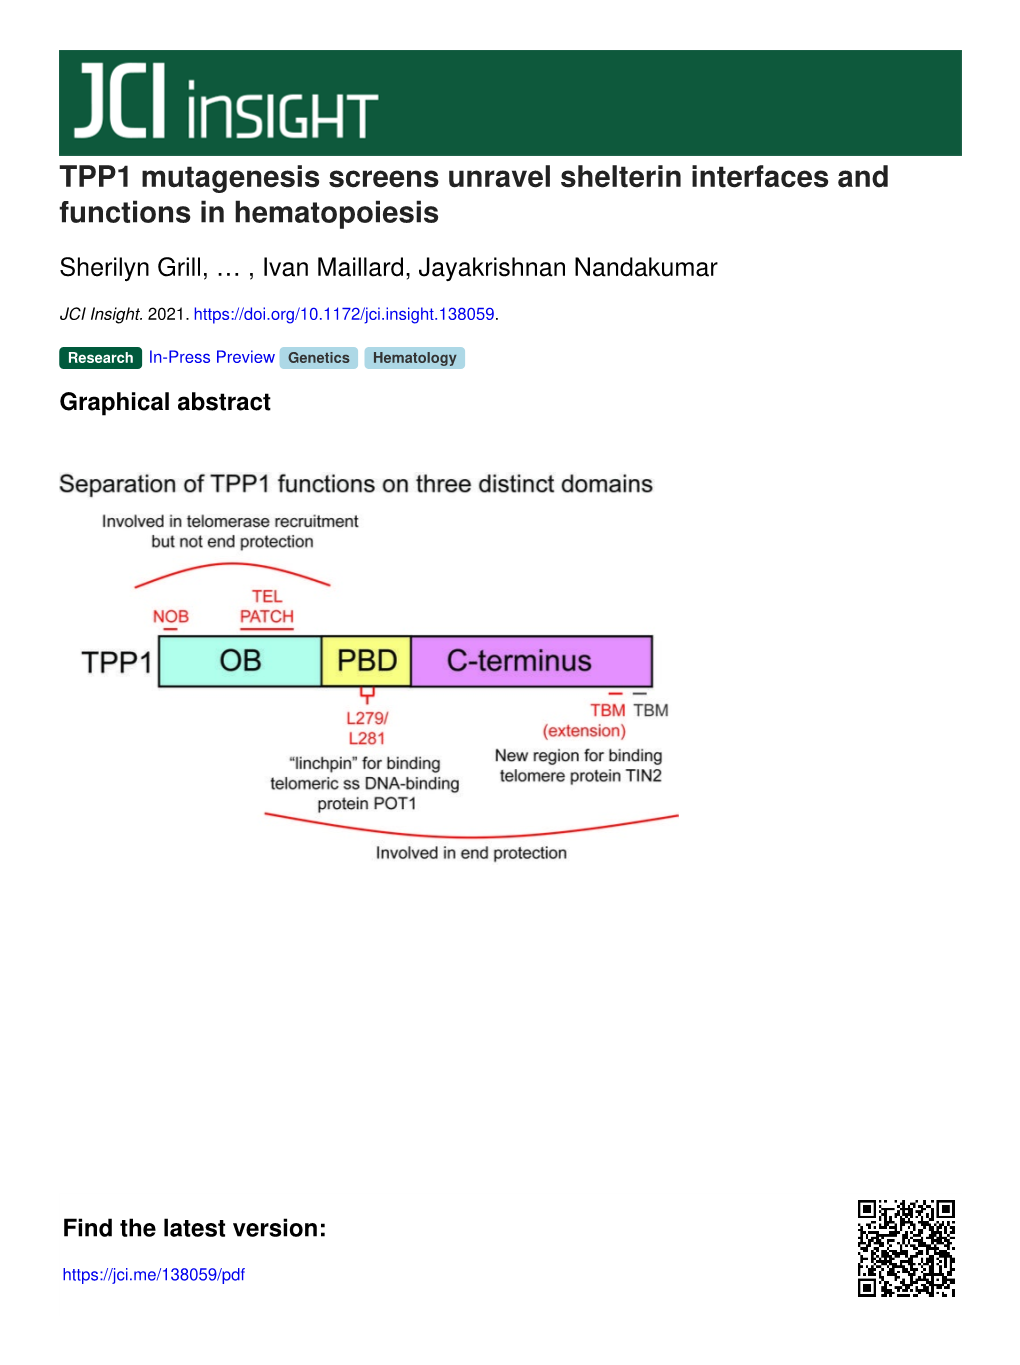 TPP1 Mutagenesis Screens Unravel Shelterin Interfaces and Functions in Hematopoiesis